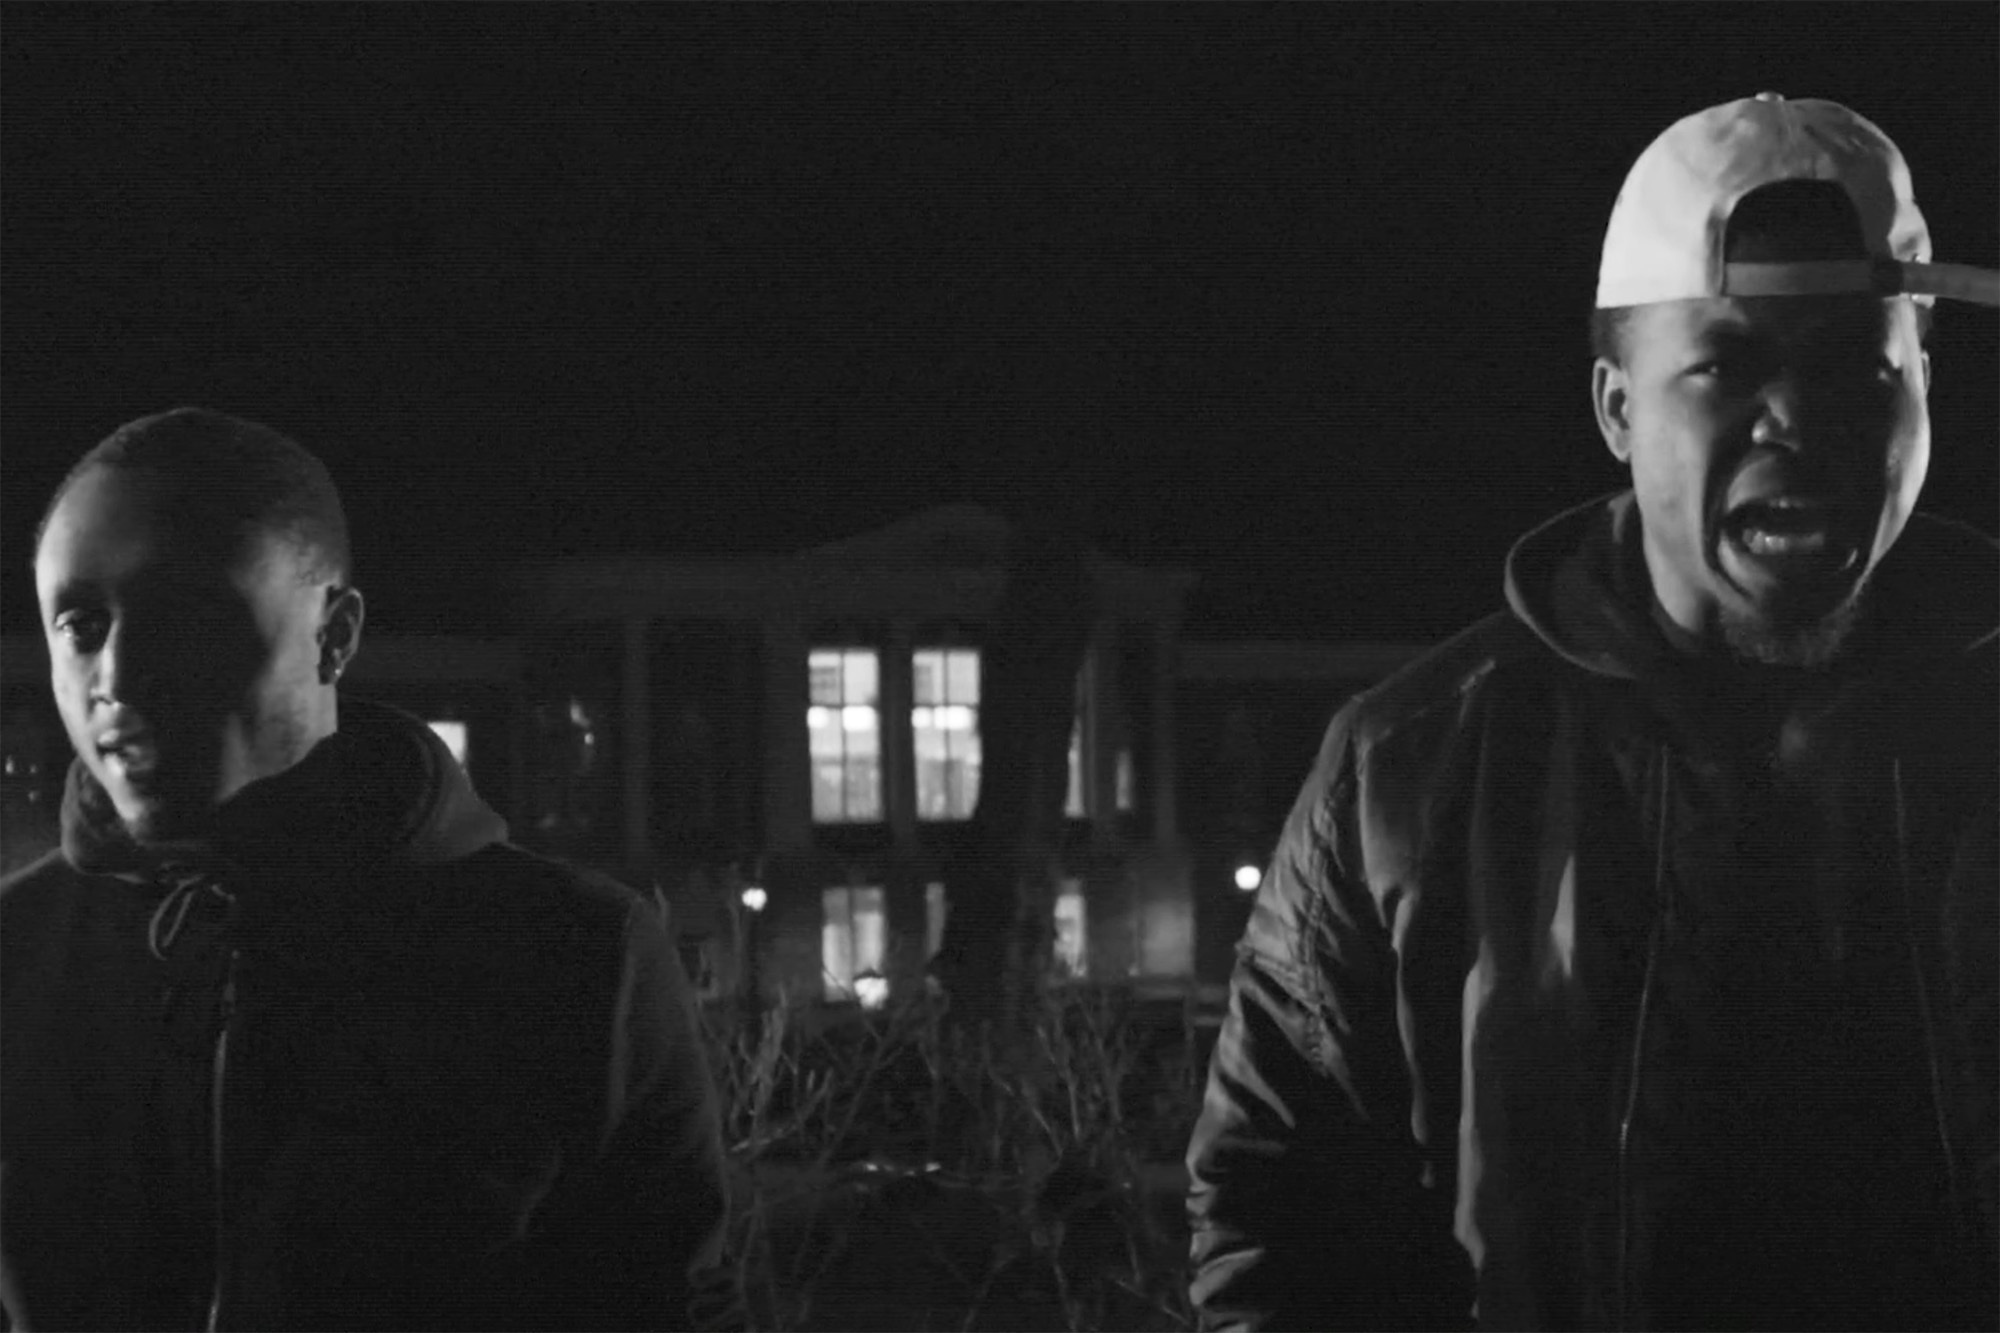 Two African American's standing in front of a building at night.  The man on the right is speaking